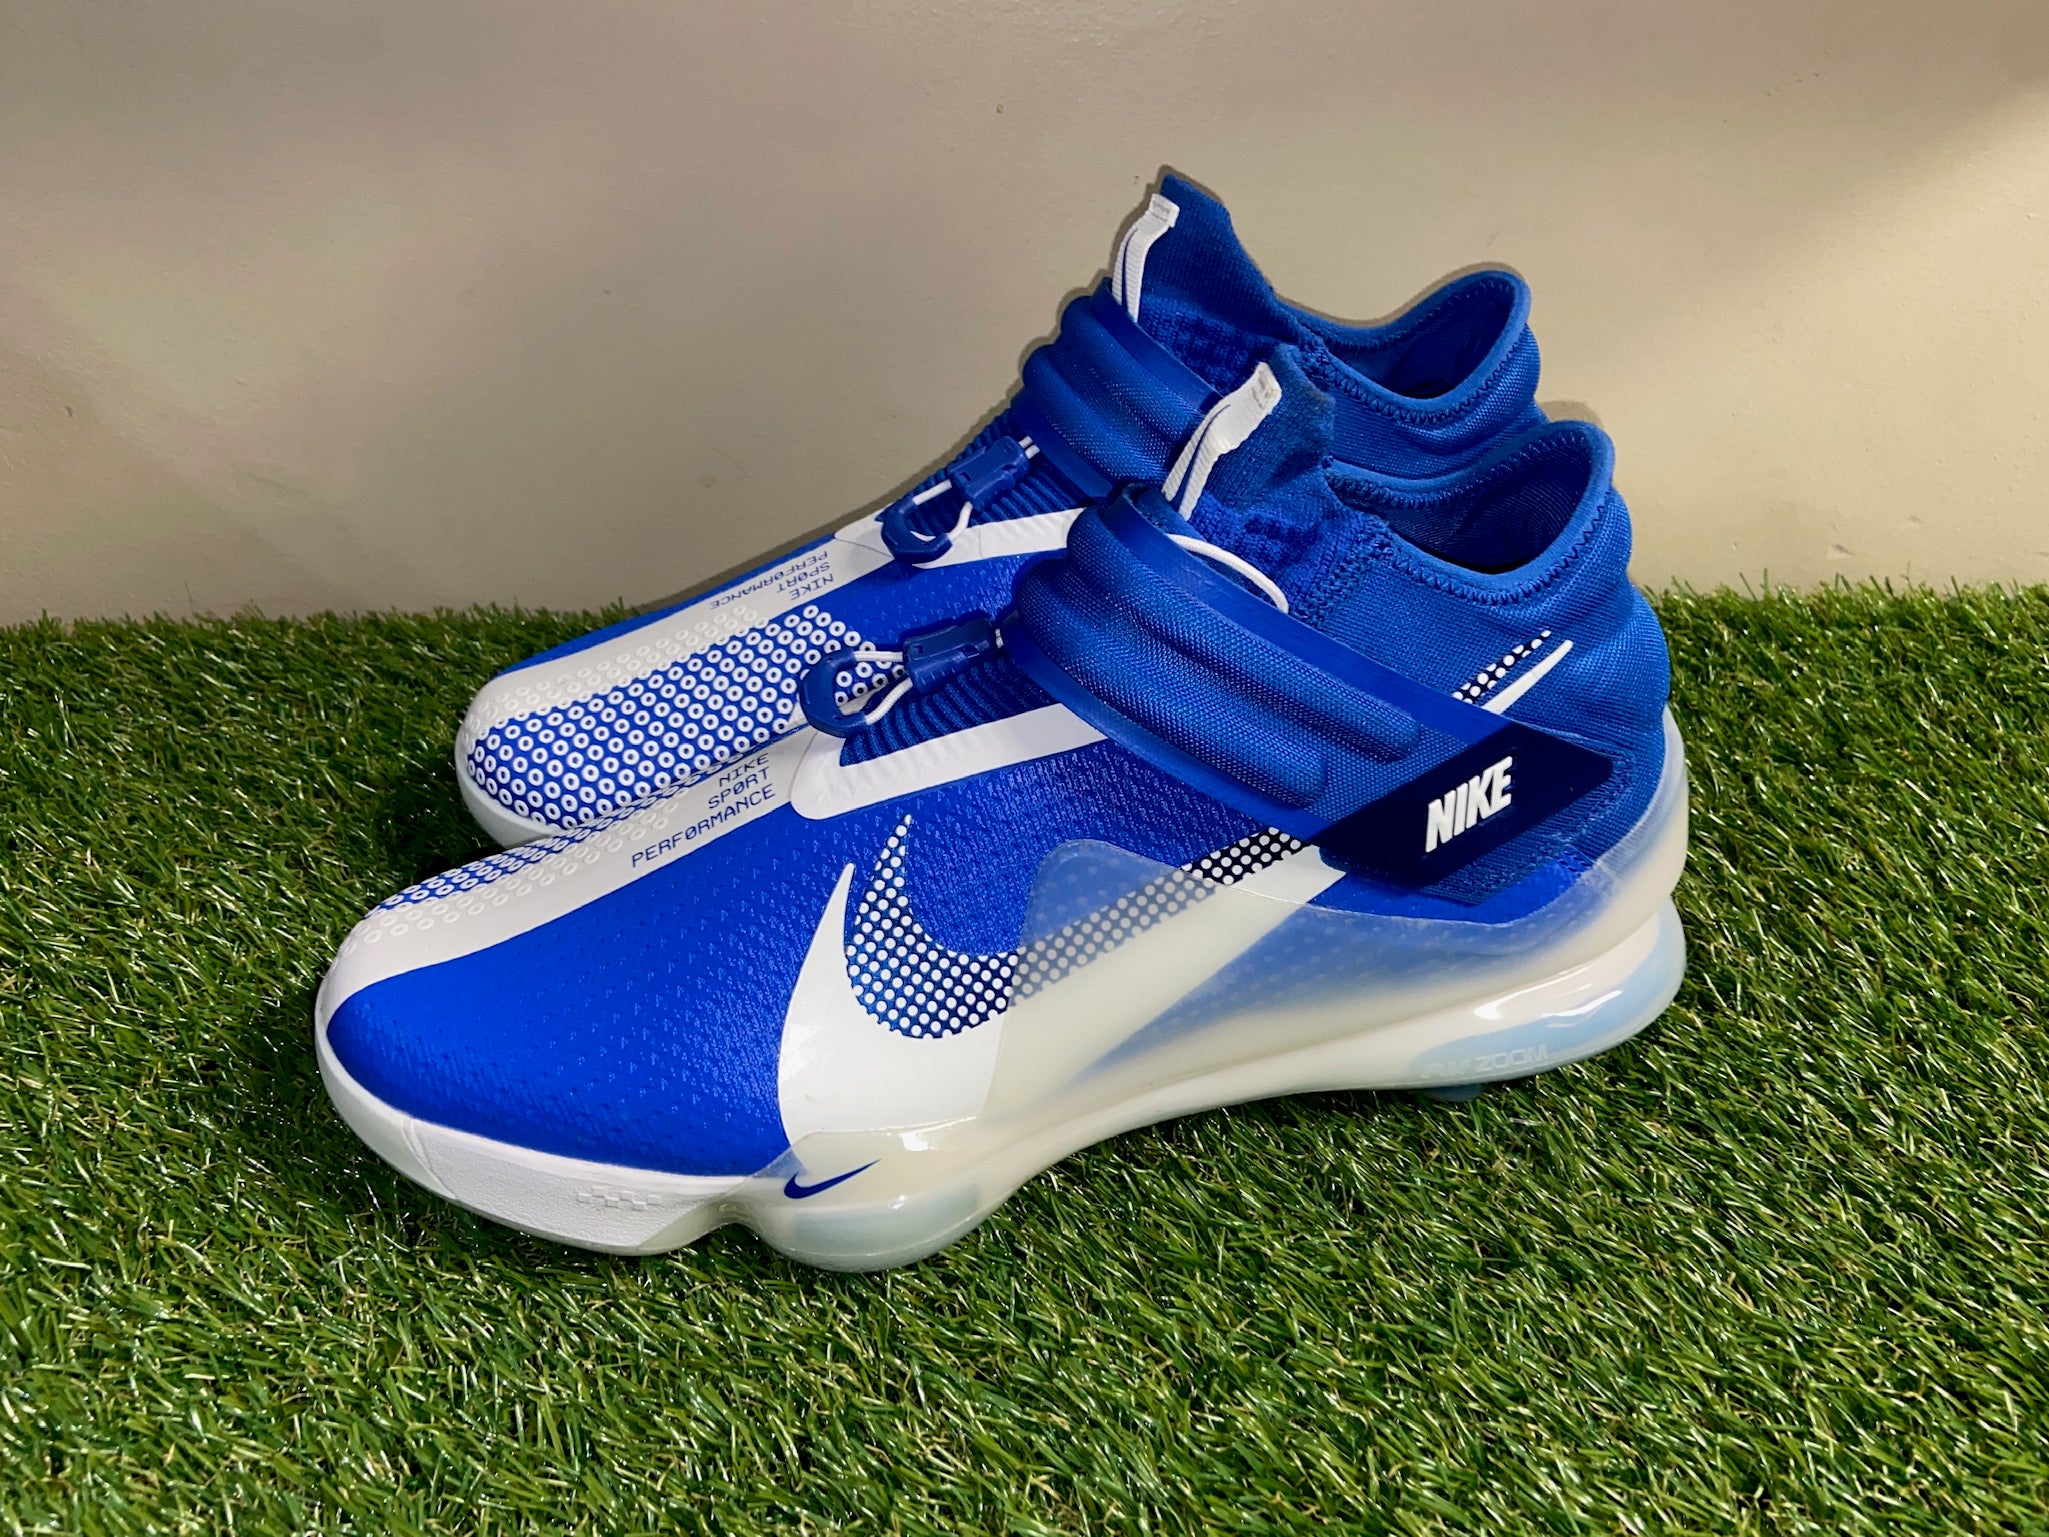 NIKE MIKE TROUT 7 FORCE ZOOM BASEBALL CLEATS ROYAL BLUE DC9904-403